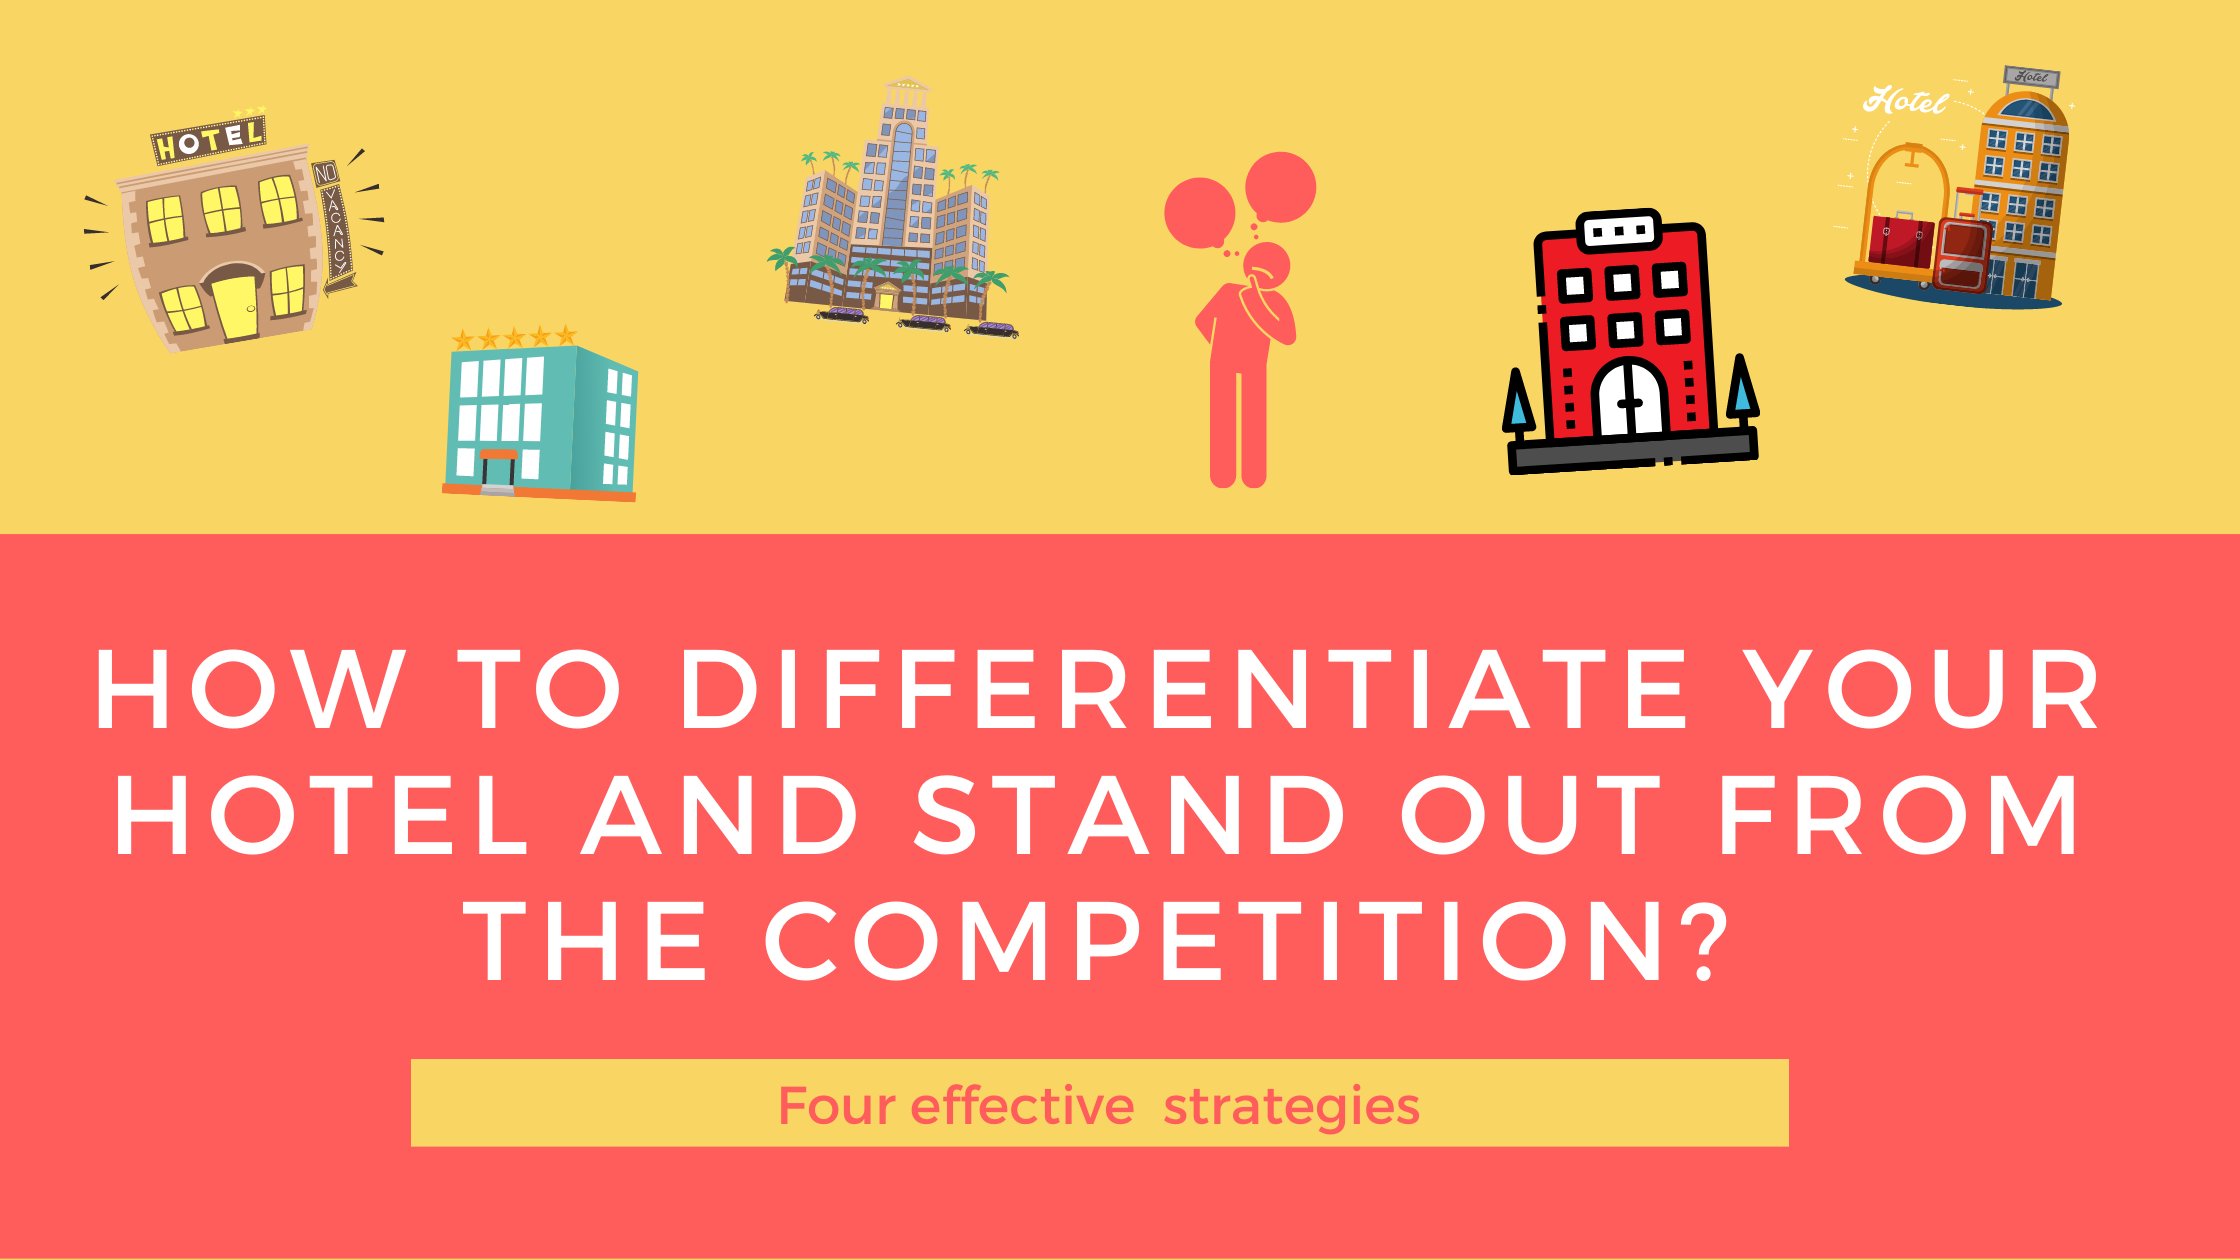 How to differentiate your hotel and stand out from the competition?